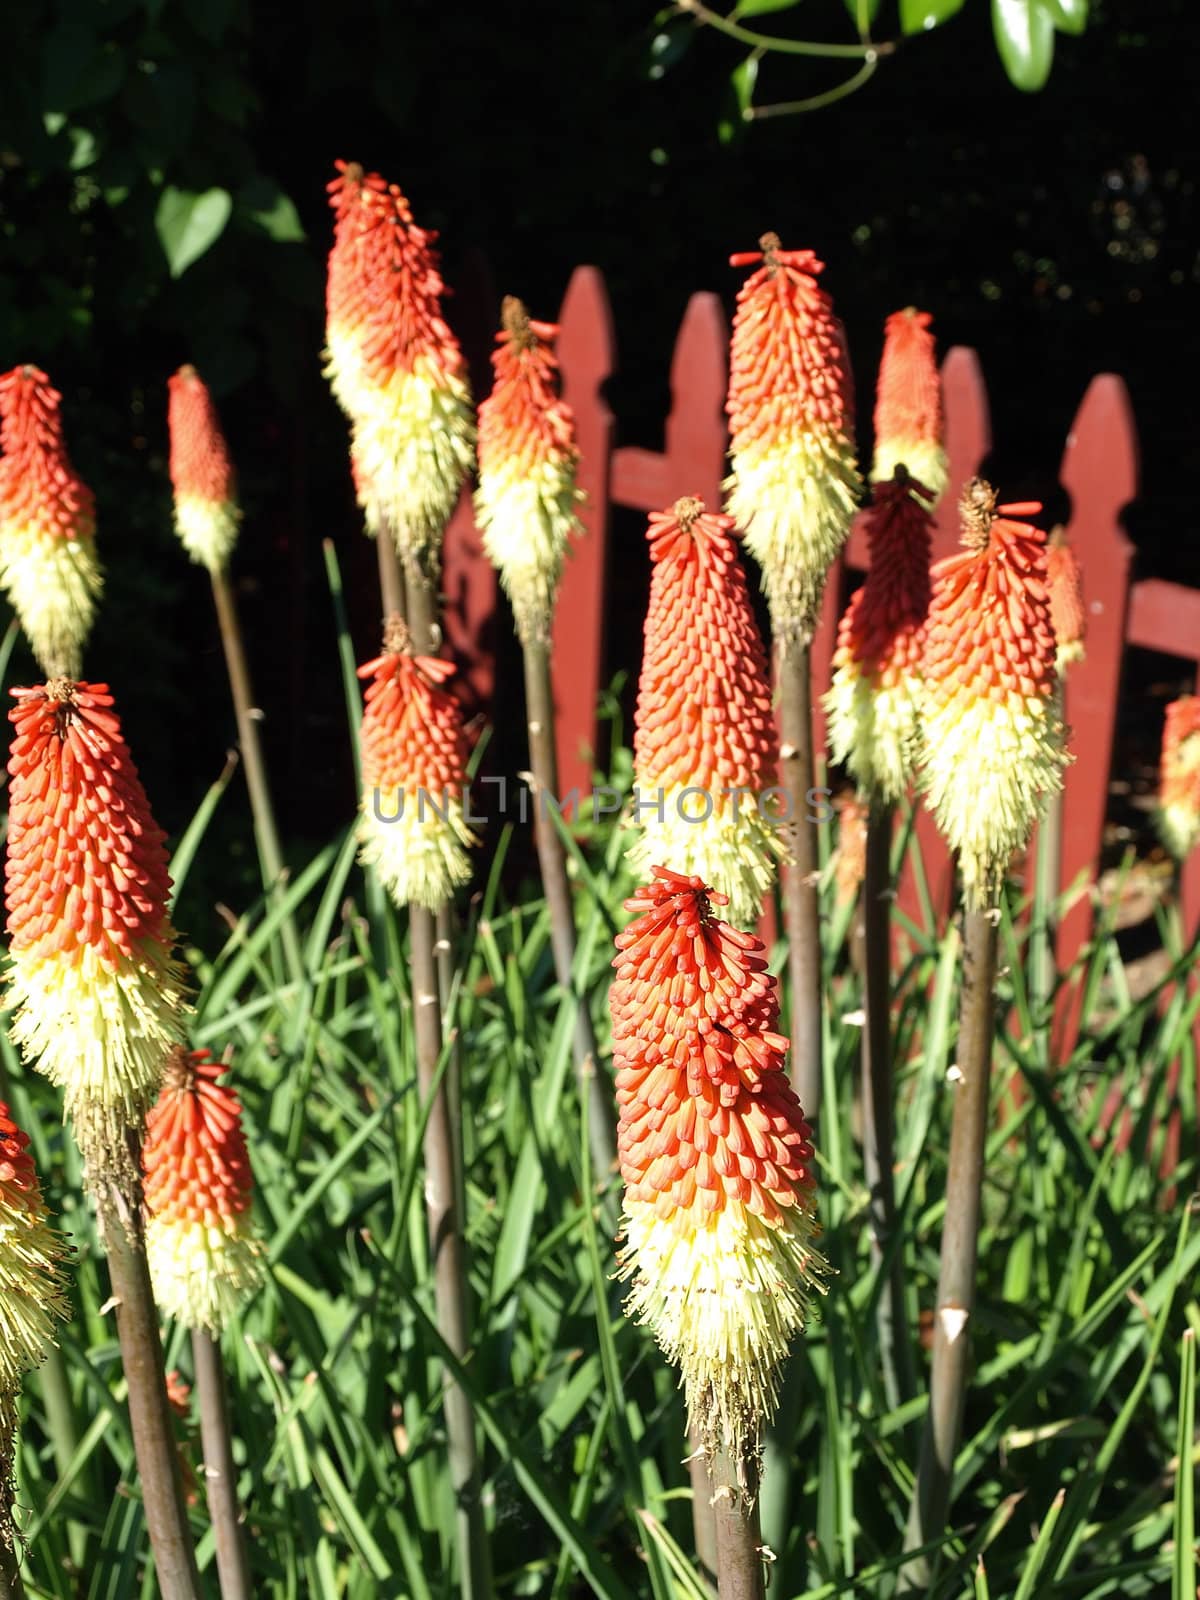 Several Torch Lilies surrounded by the garden in the sun